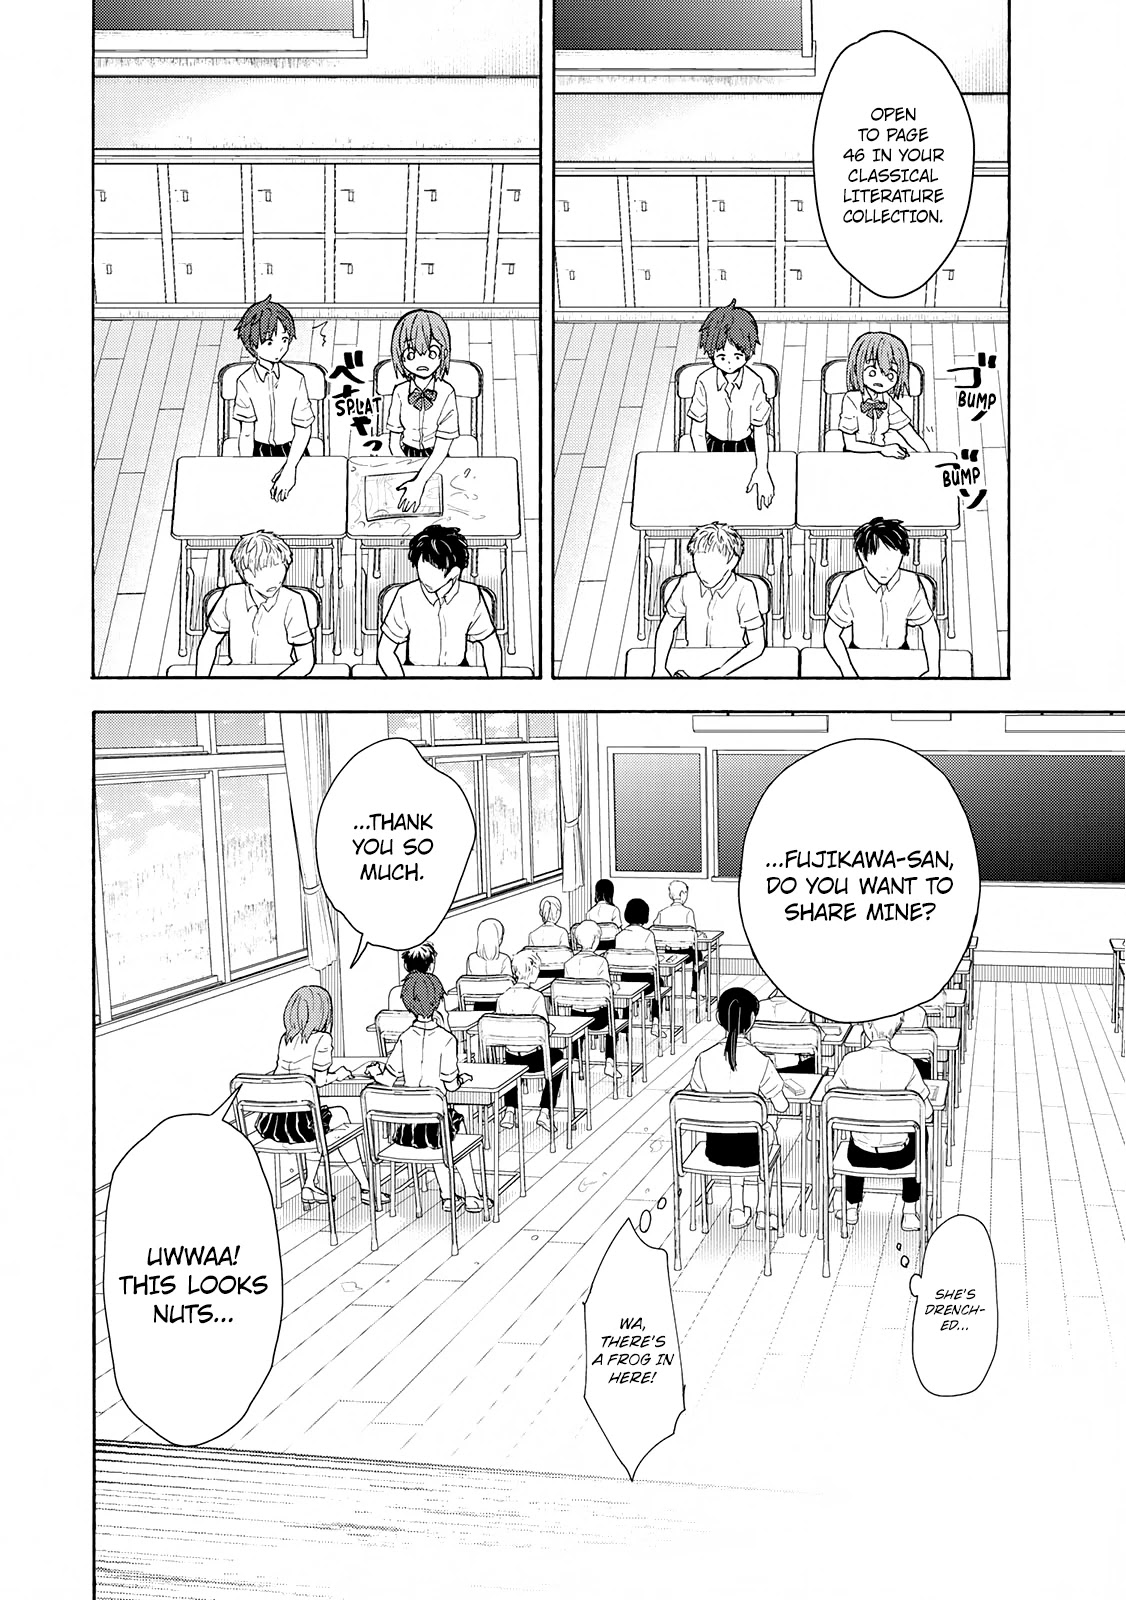 Hiyumi's Country Road Chapter 3 #23